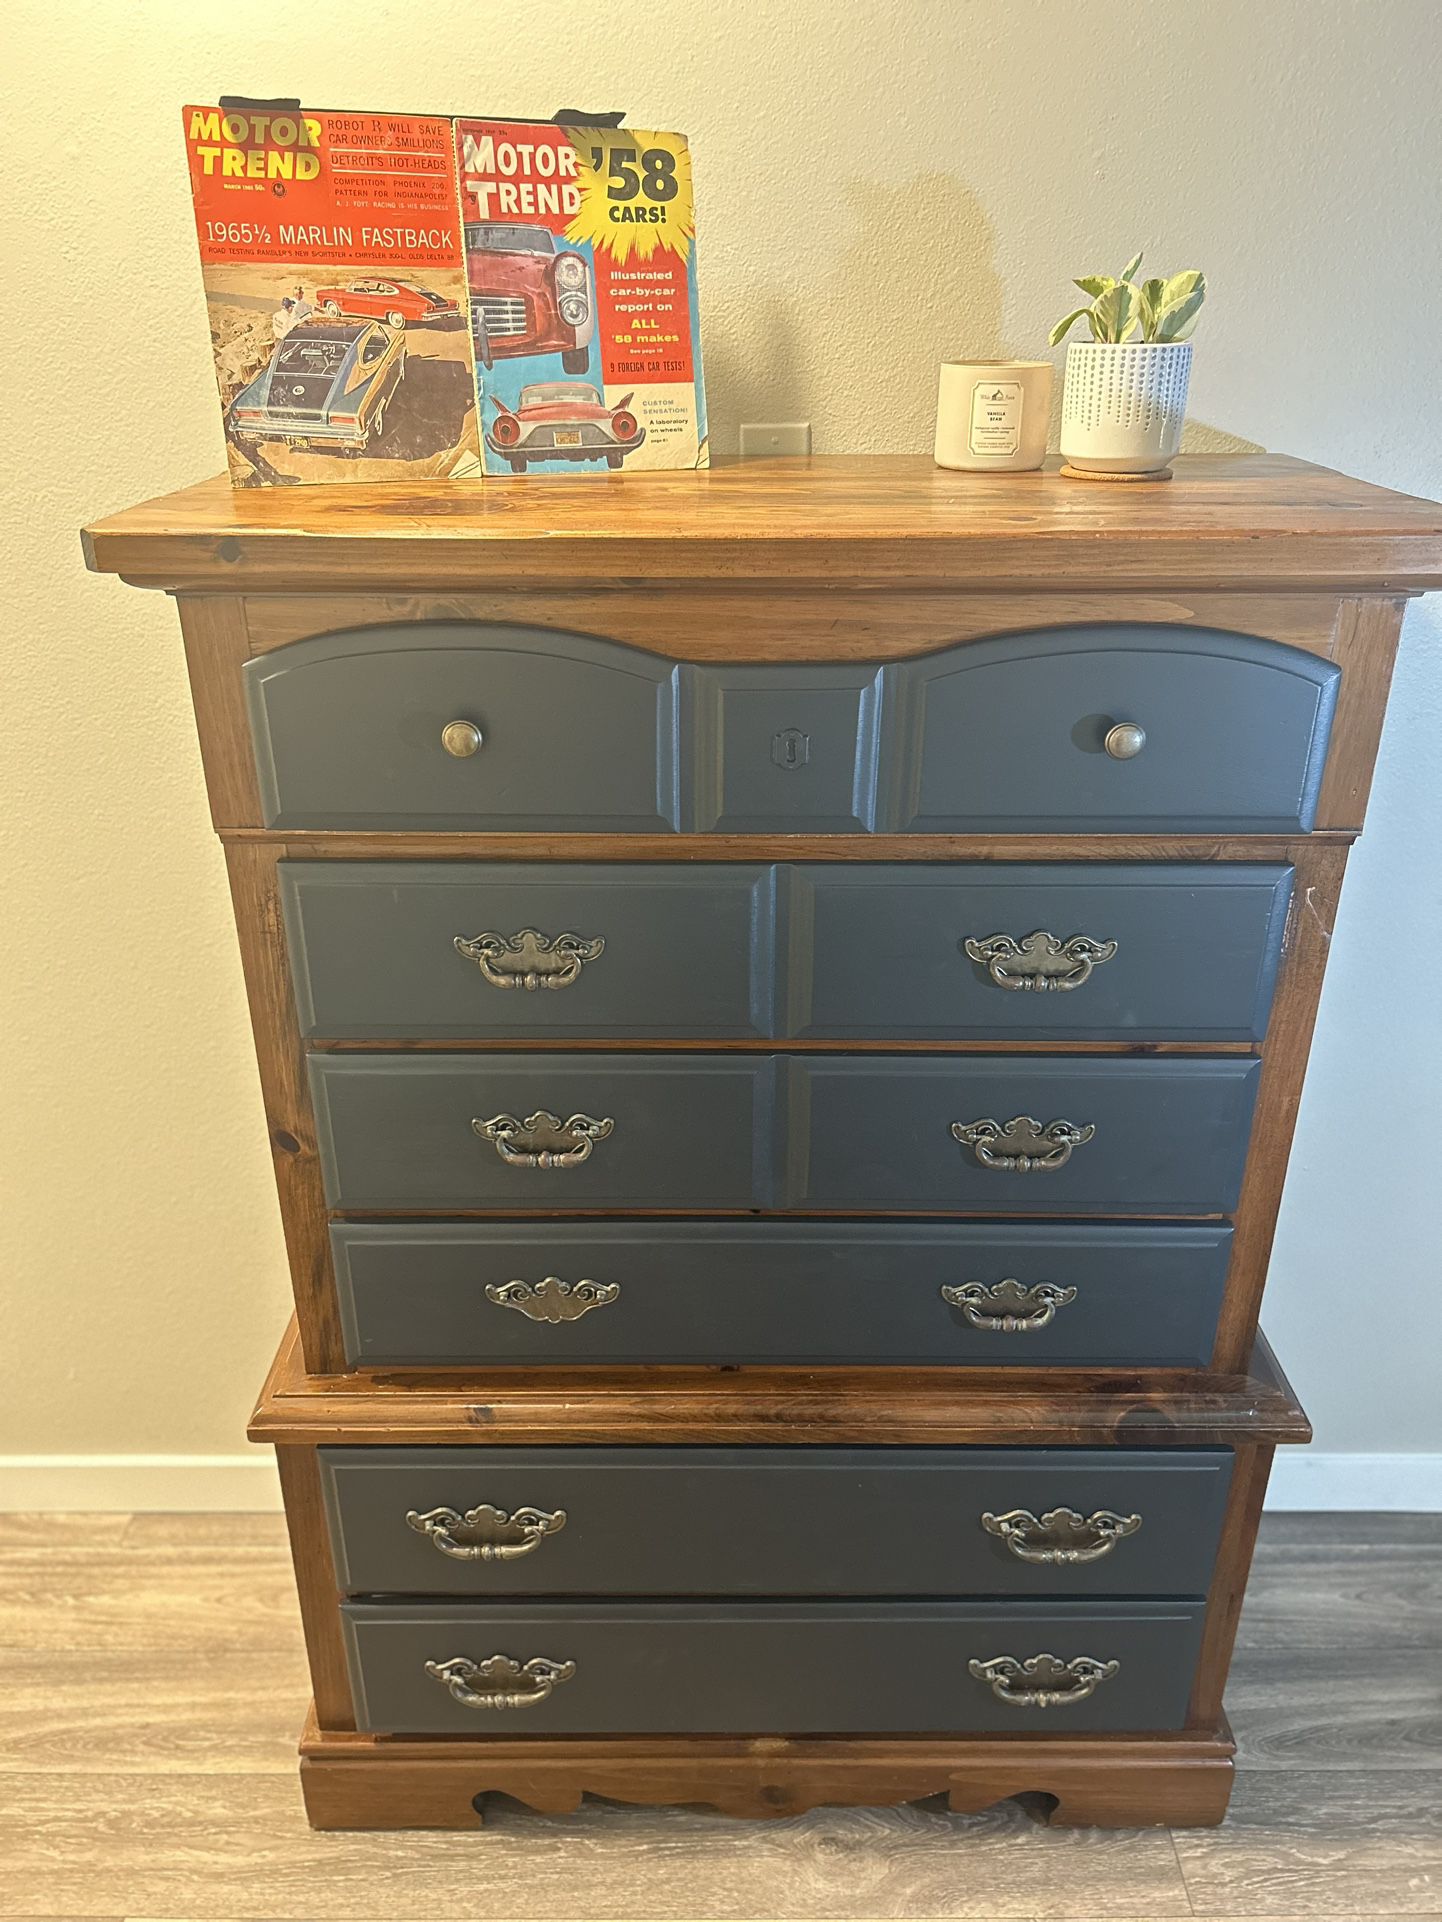 Mid Century Modern Dresser with a Modern Injection